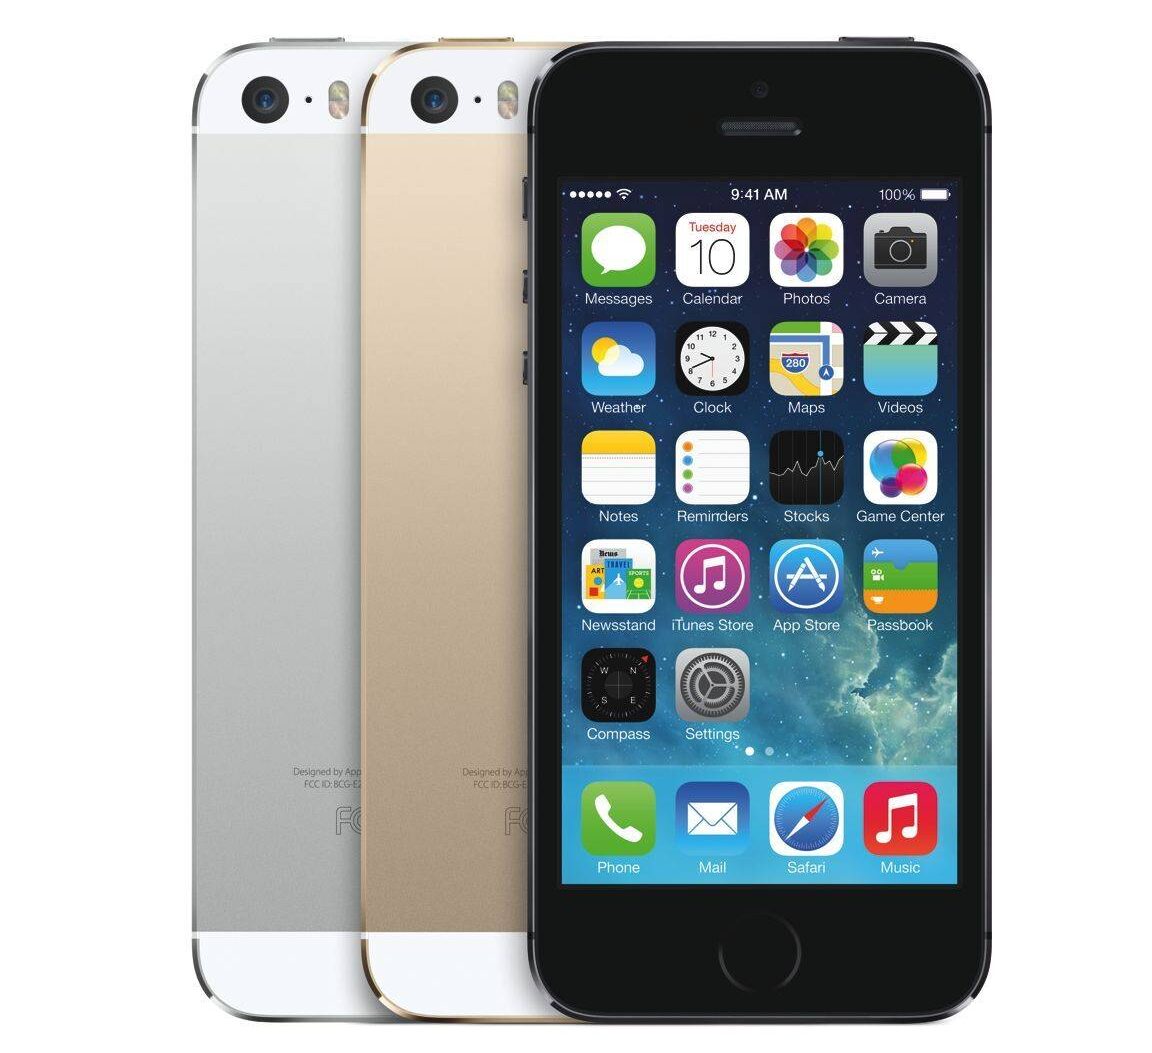 iPhone 5s in three colors: gold, silver and space gray.